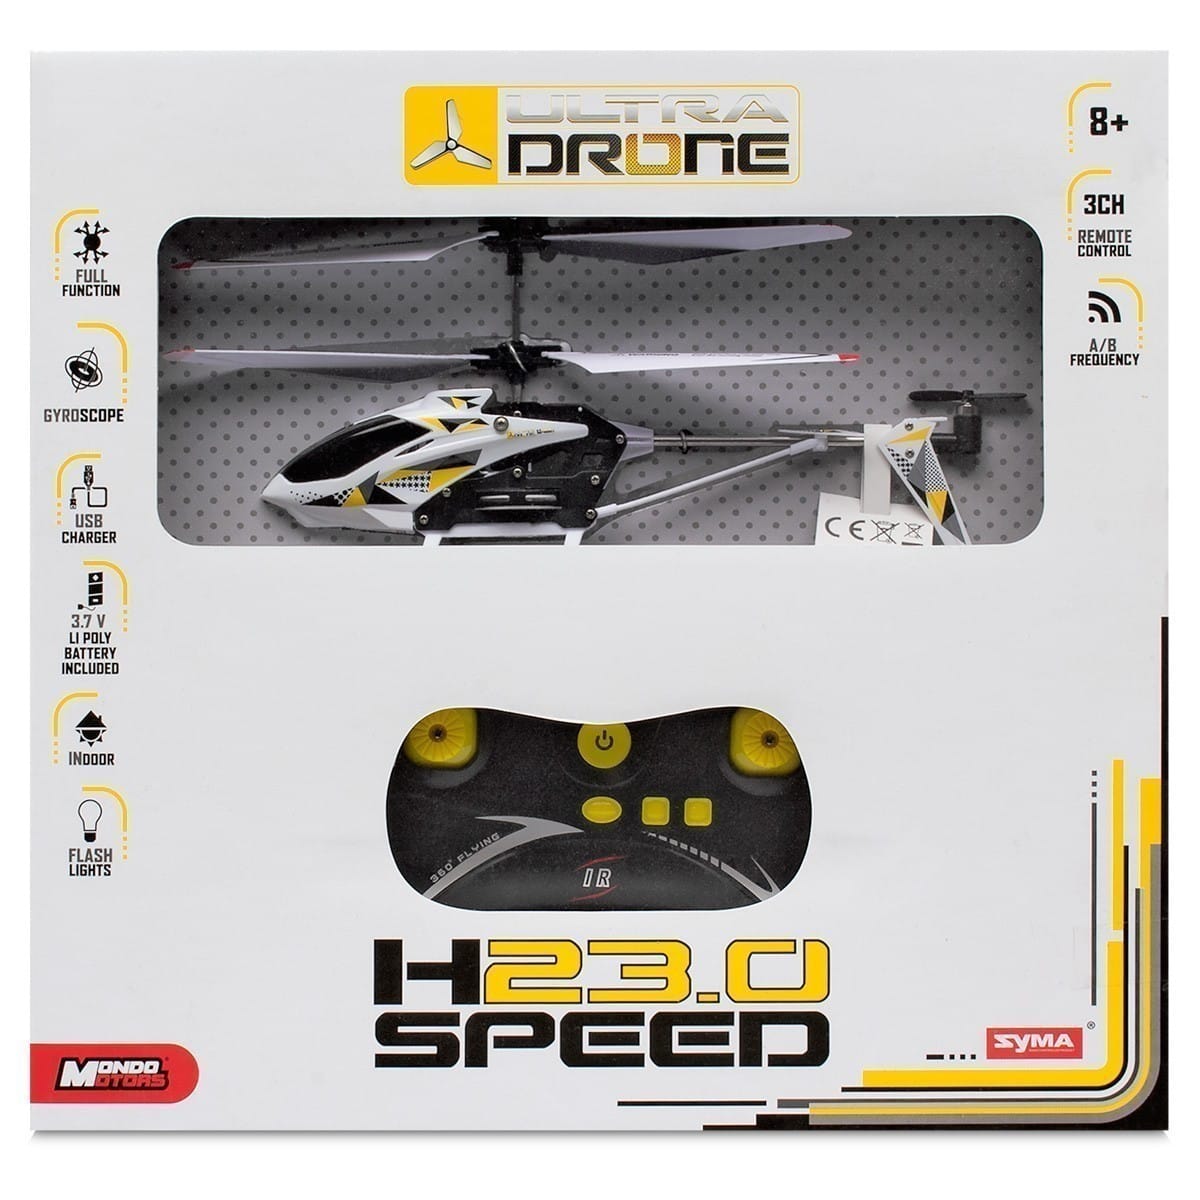 Syma - Ultra Drone R/C H23.0 Speed Helicopter